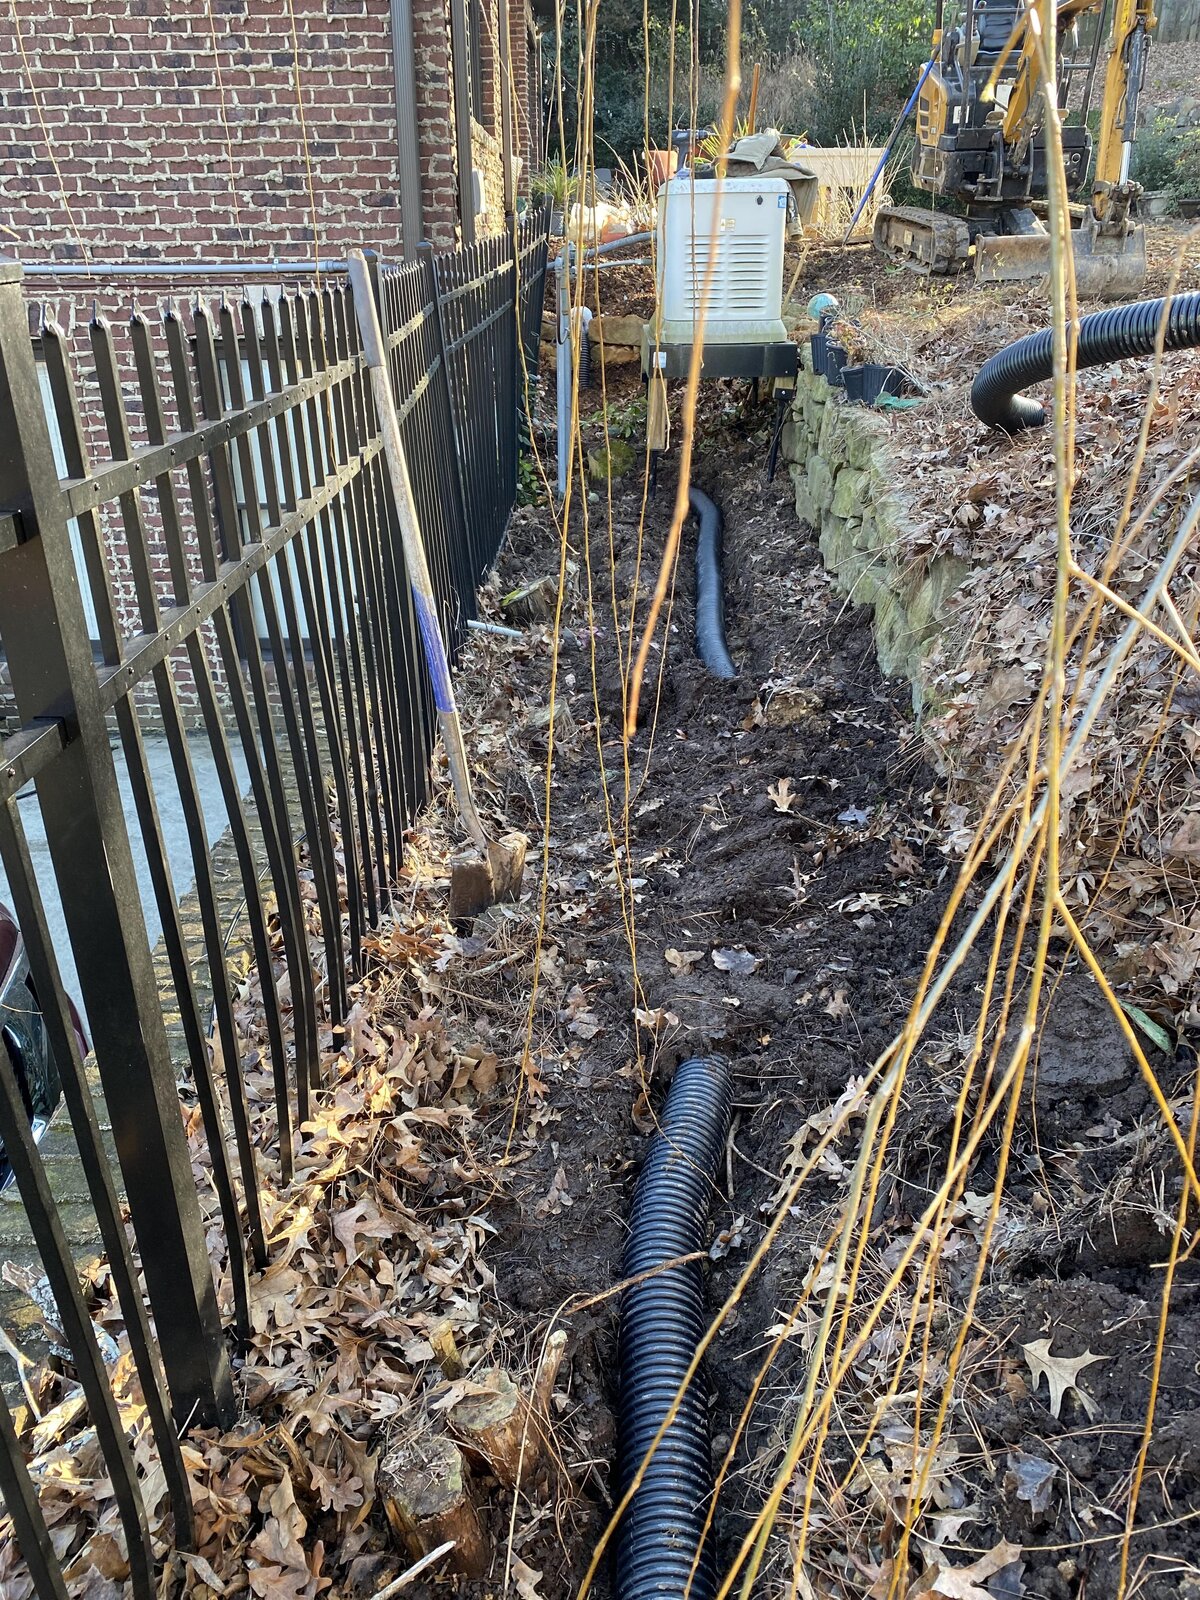 black-drainage-hose-in-dirt-next-to-metal-fence